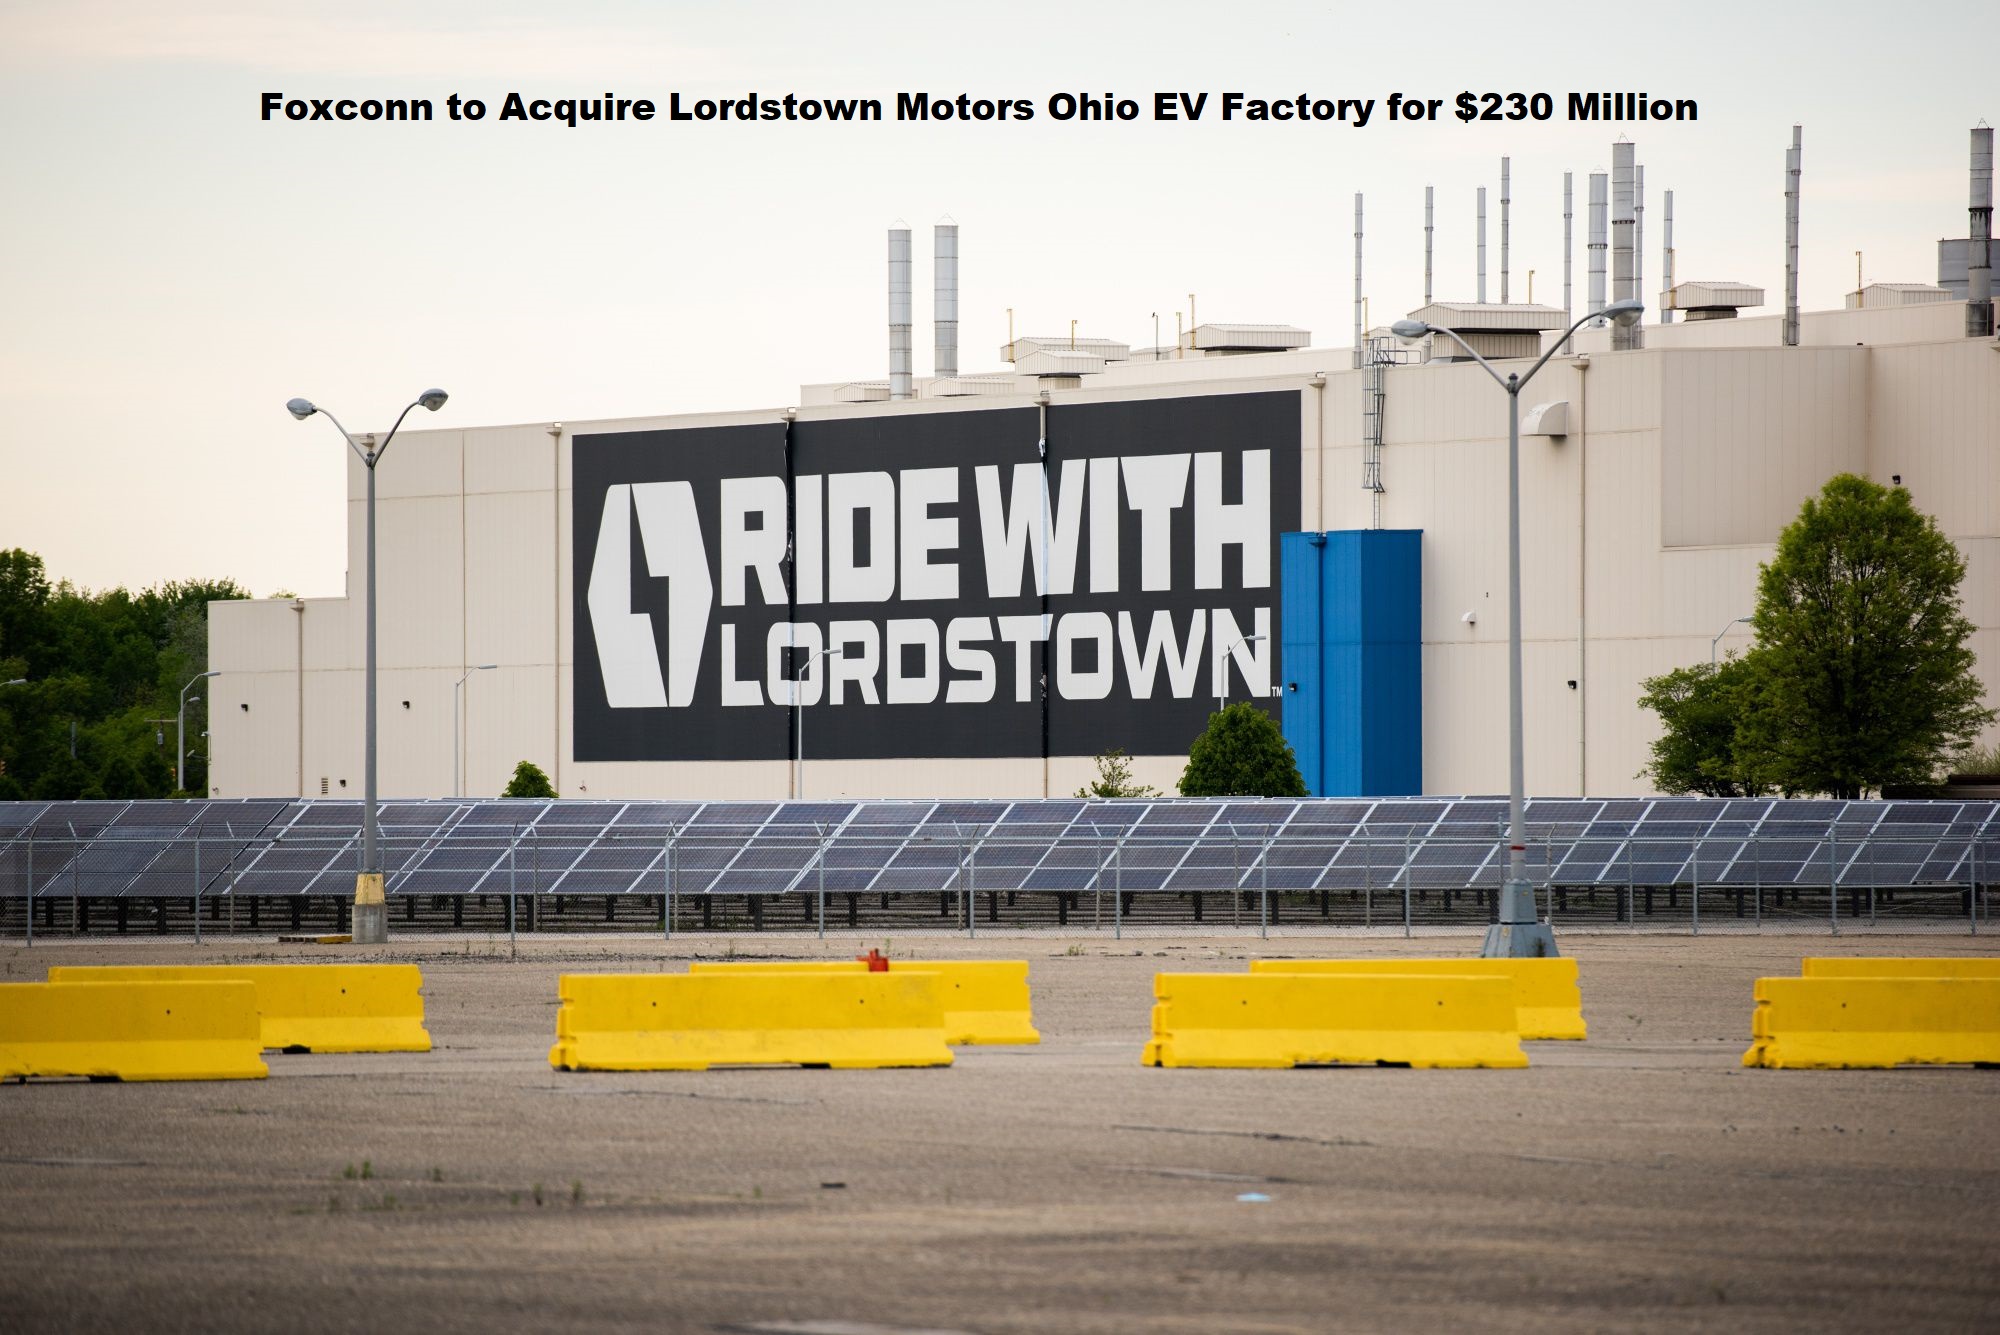 Foxconn to Acquire Lordstown Motors Ohio EV Factory for $230 Million